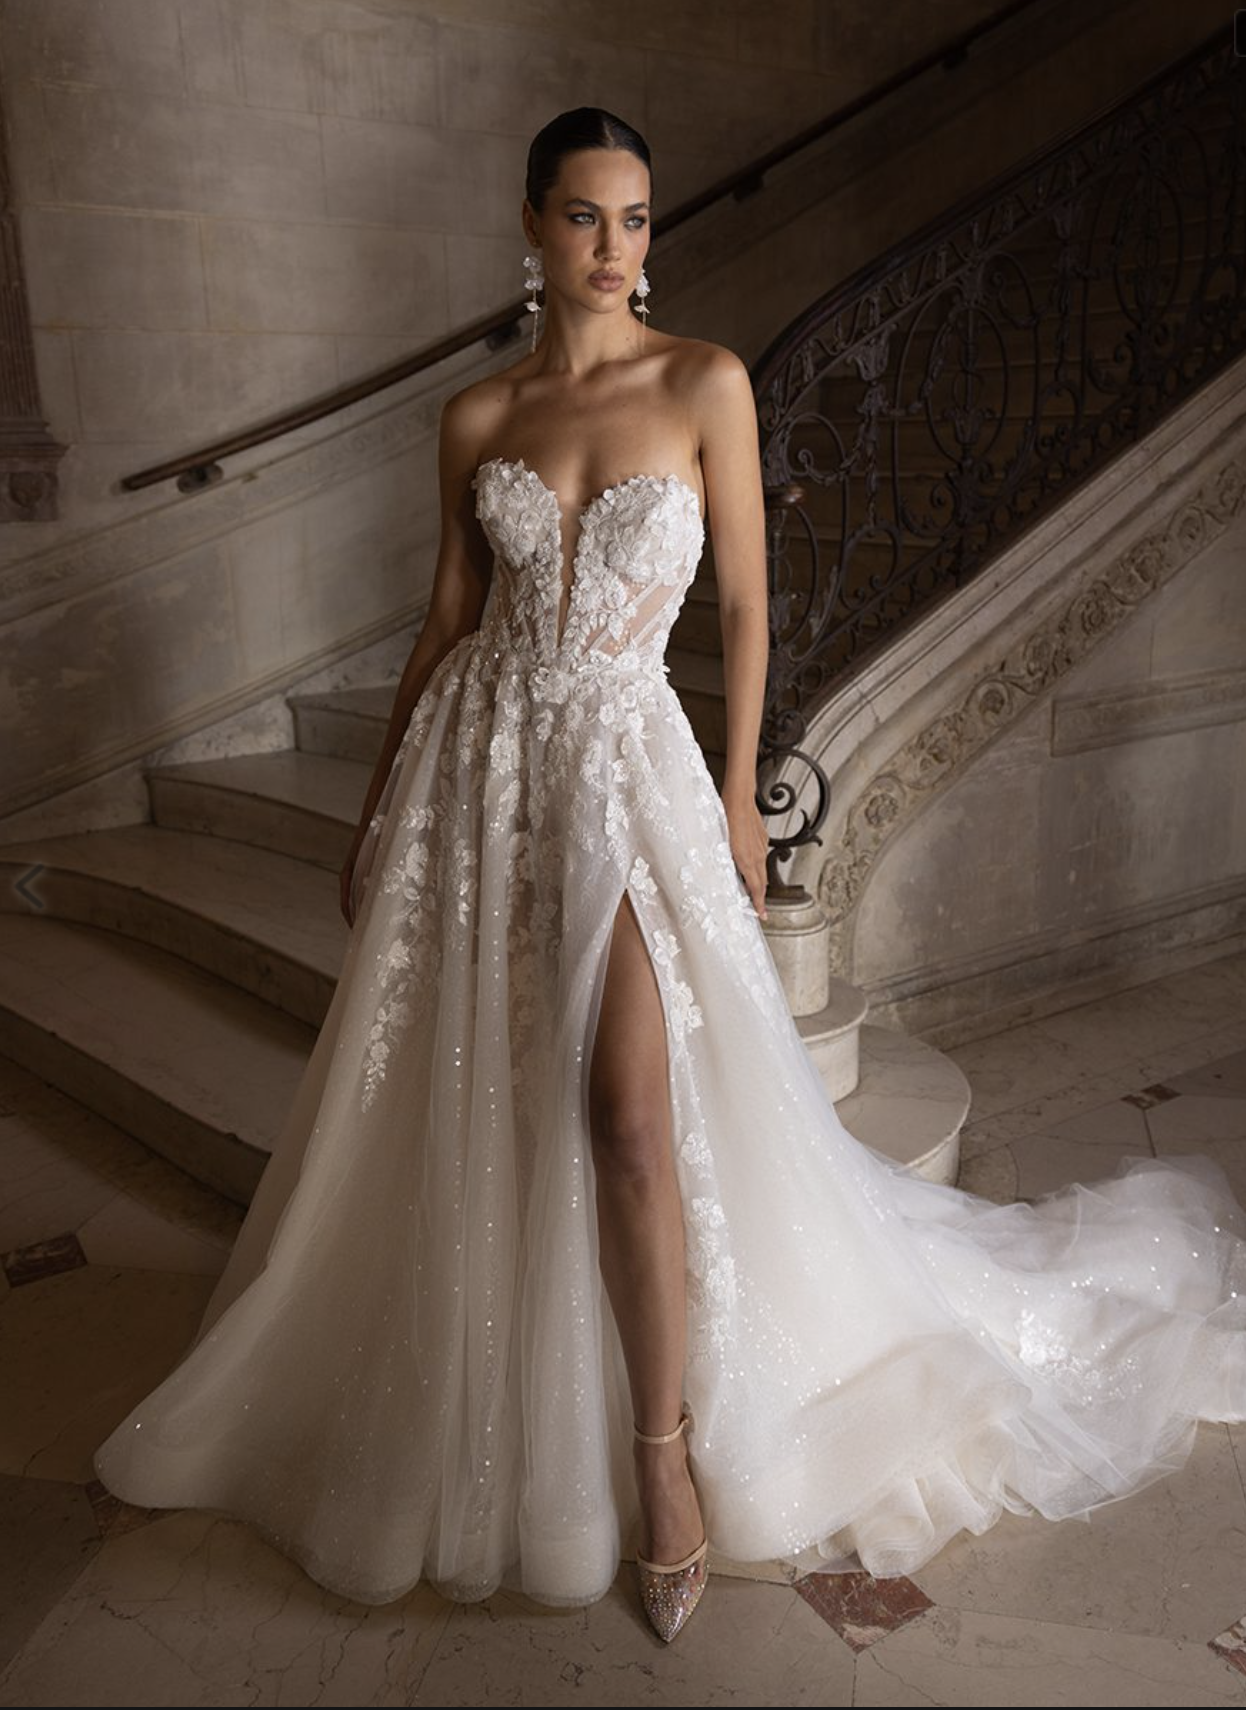 32 New Bridal Designers - The Best New Bridal Gown Designers